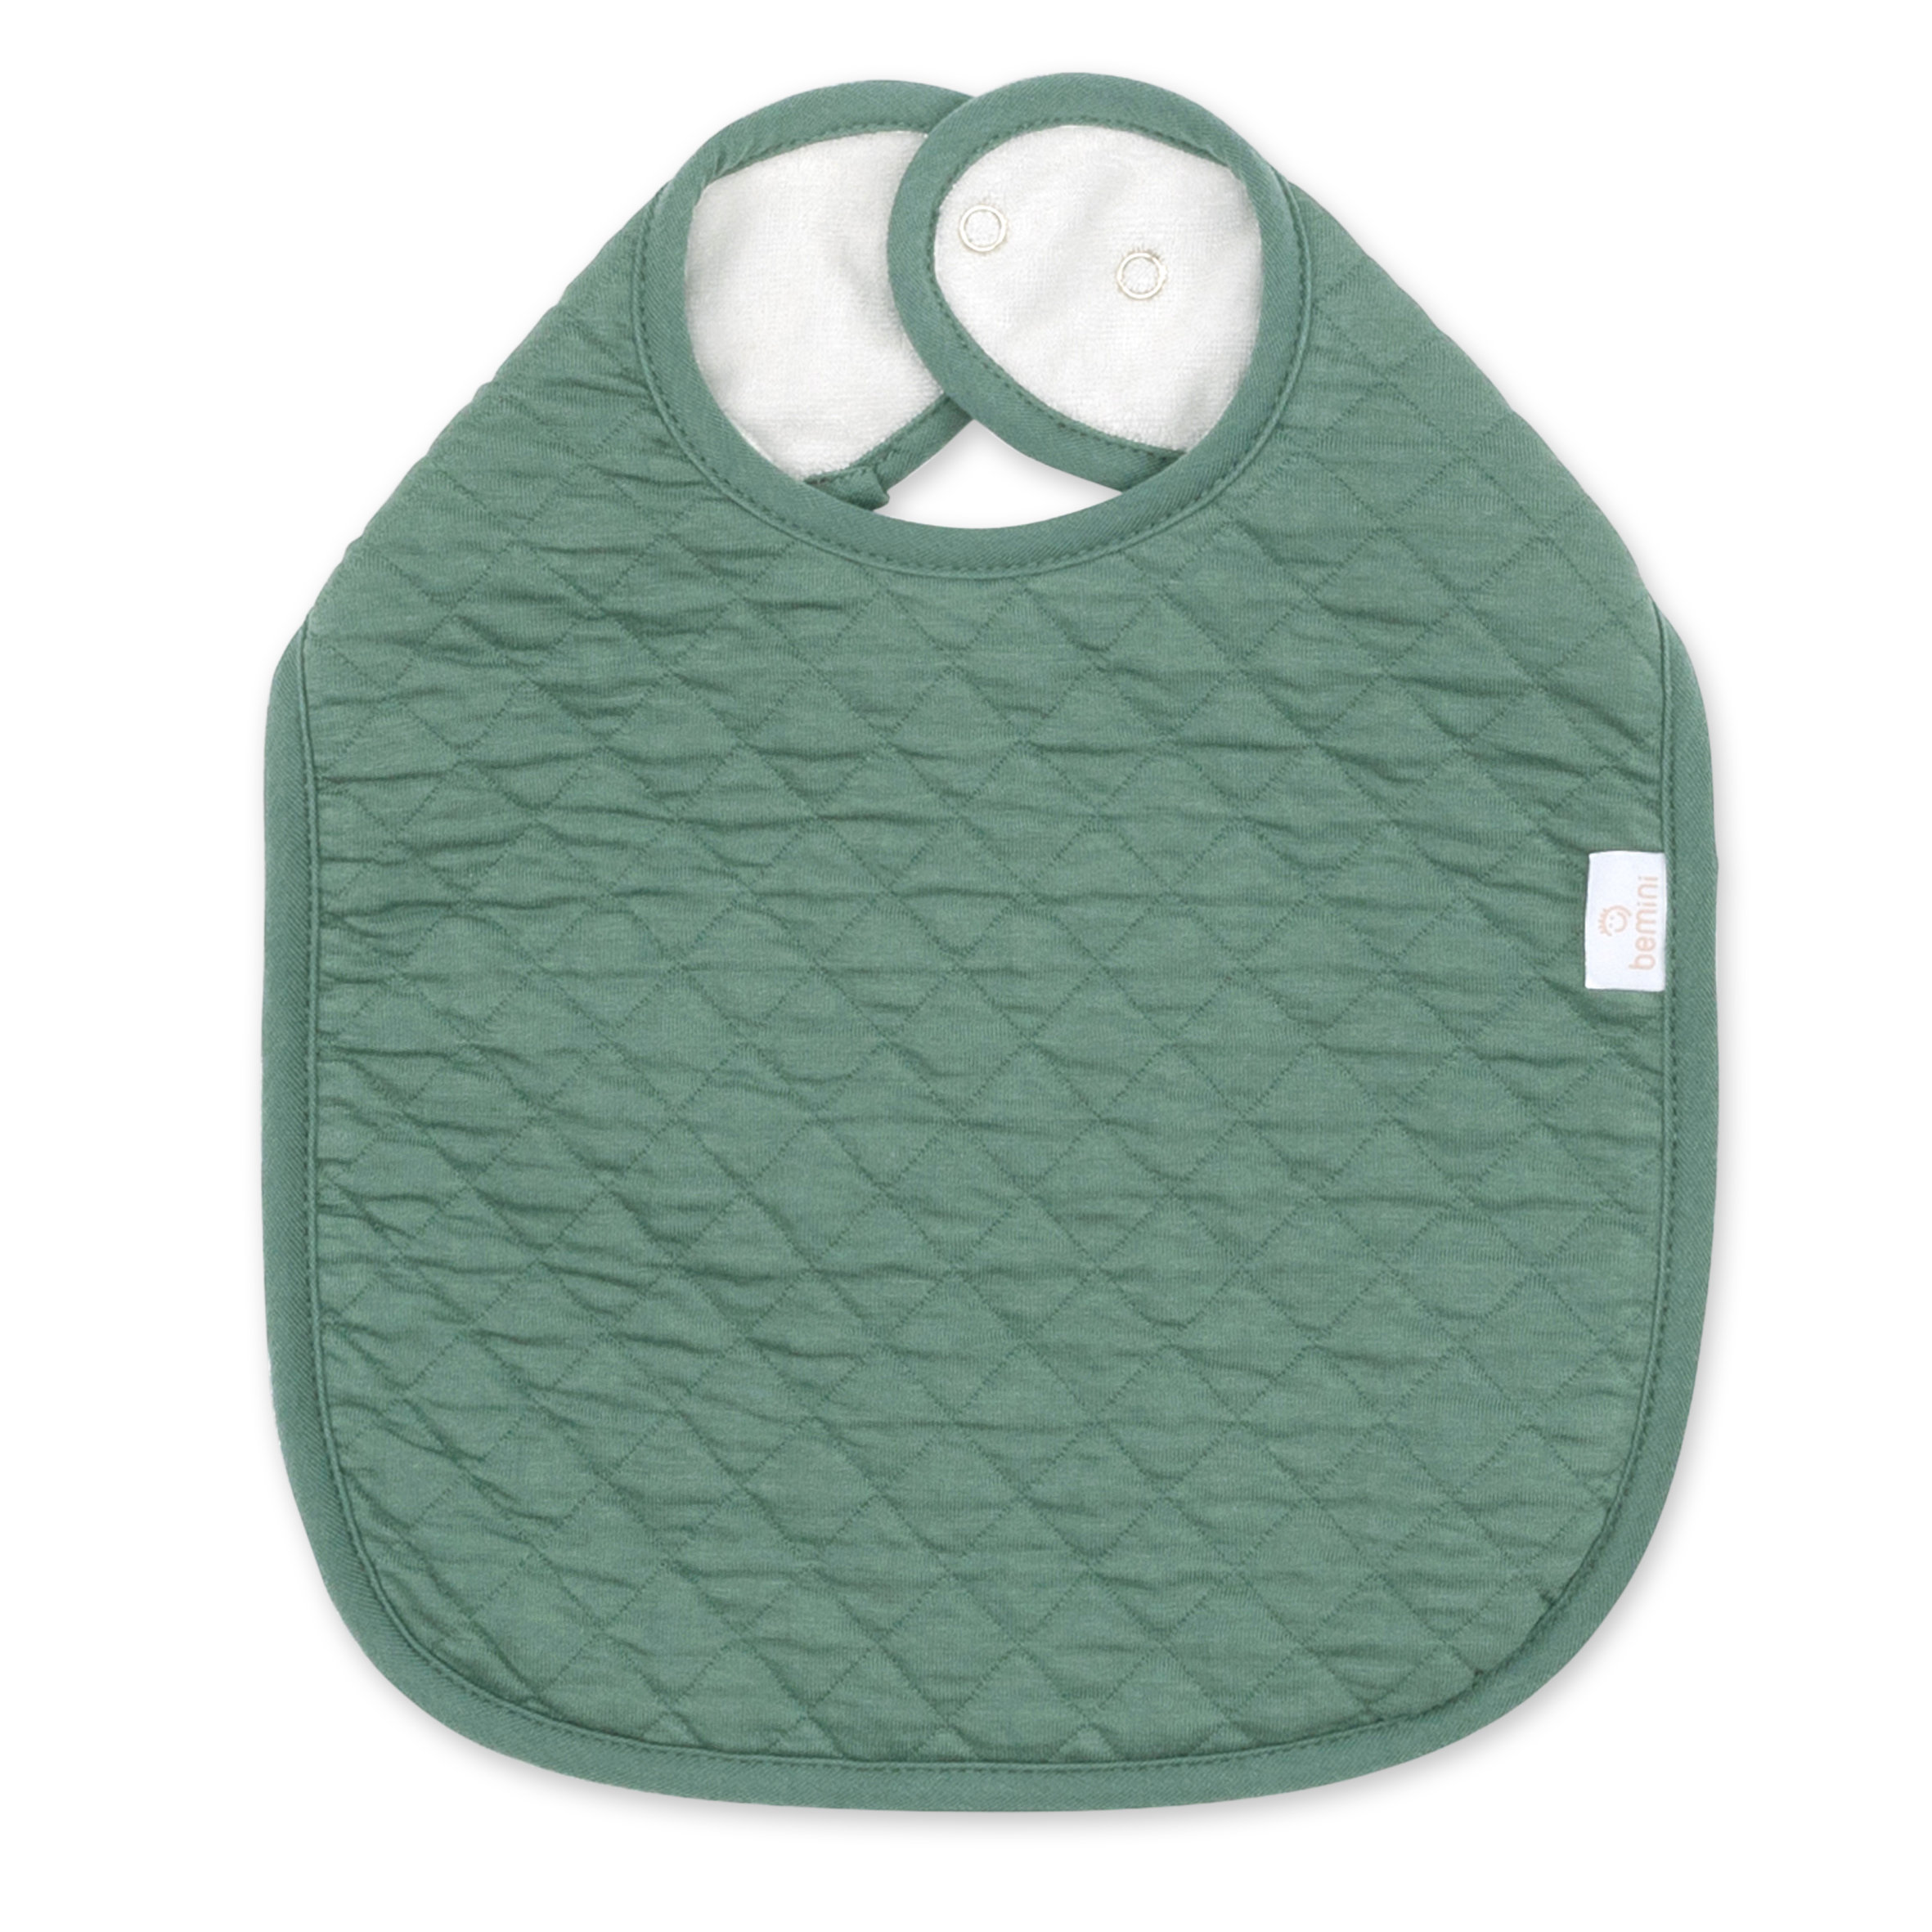 Bib waterproof Pady quilted jersey 37cm QUILT Green